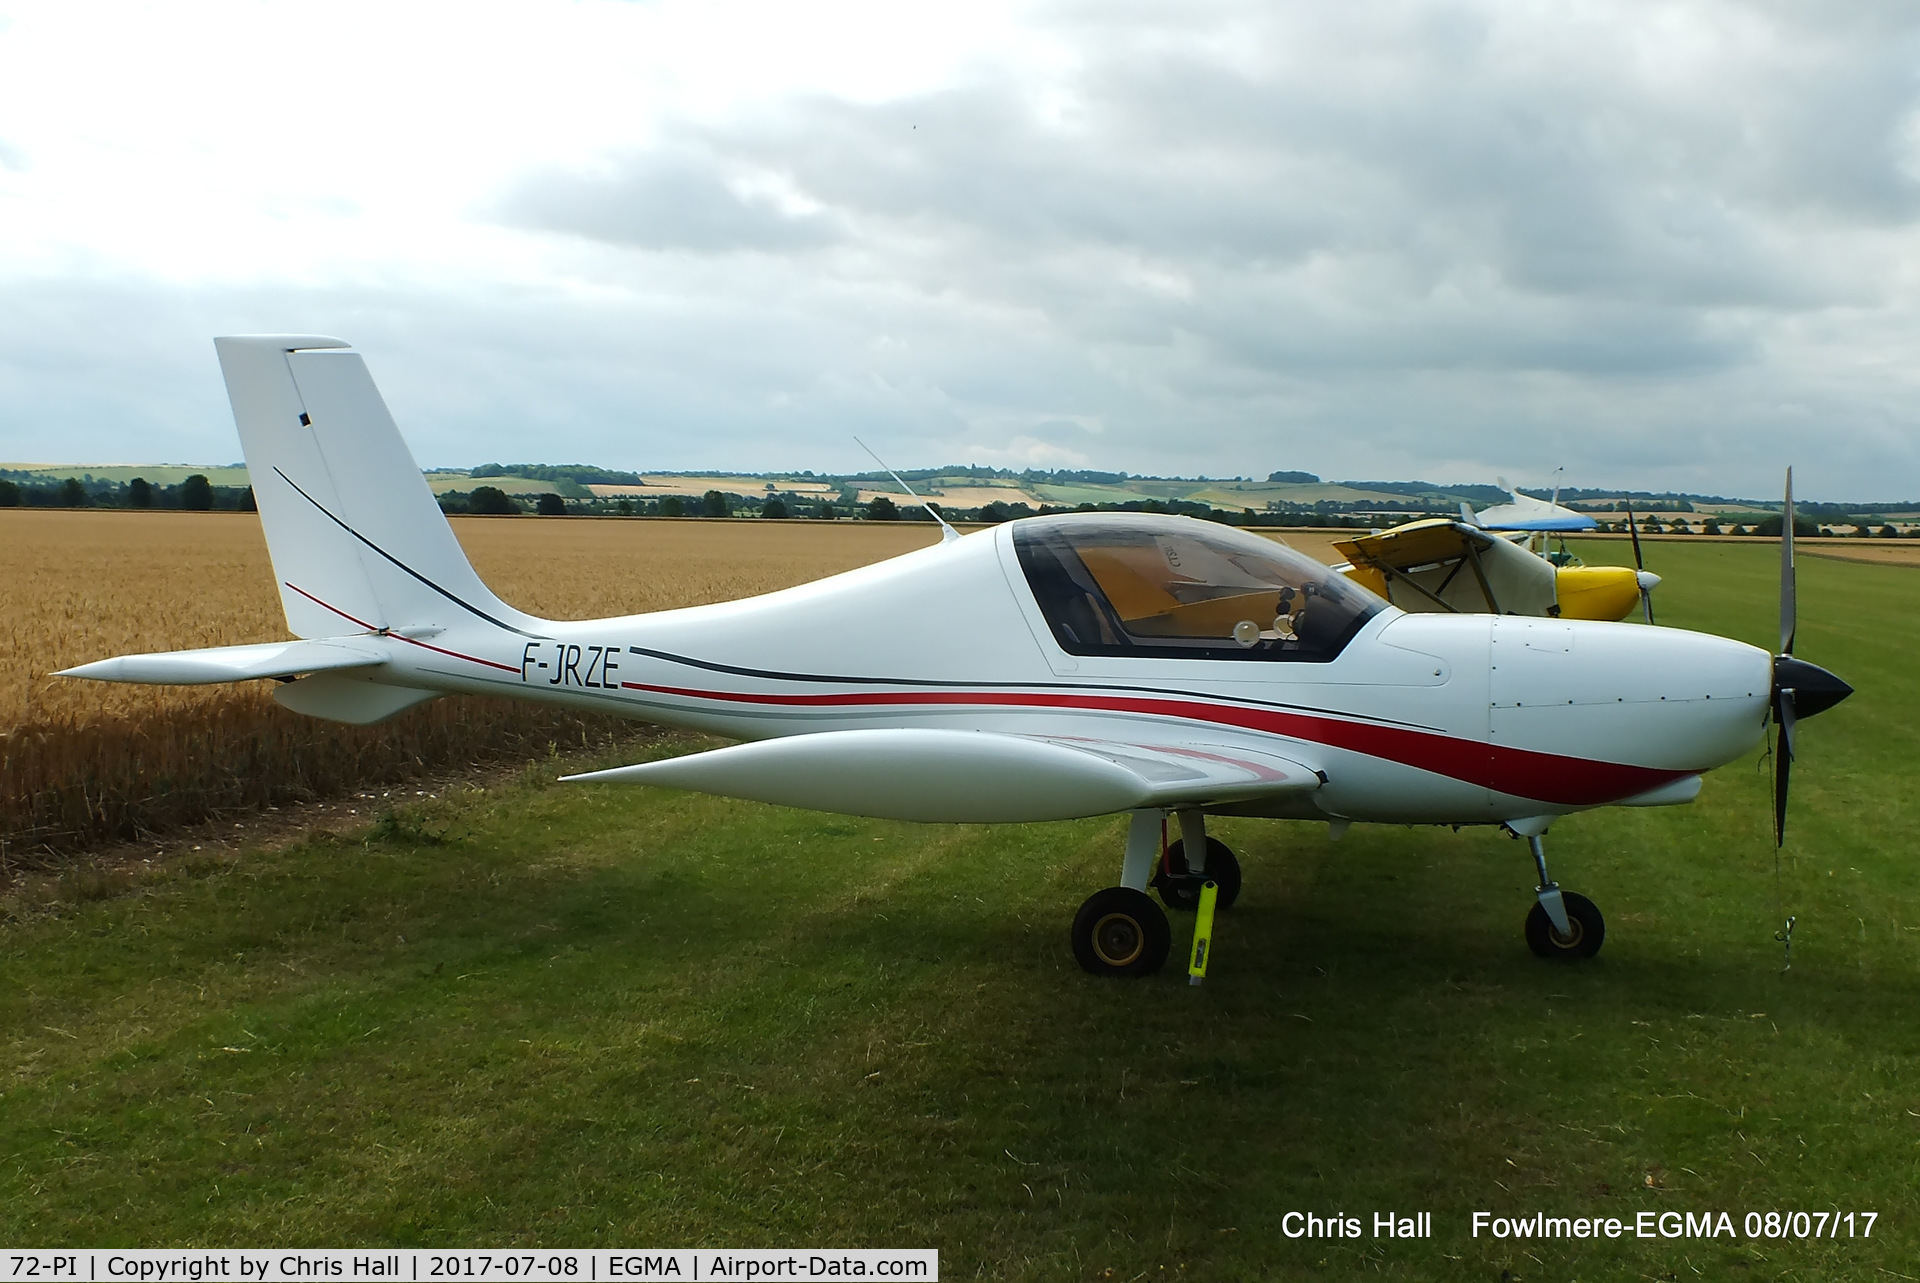 72-PI, Pro.Mecc Sparviero 100 C/N Not found 72-PI, at Fowlmere